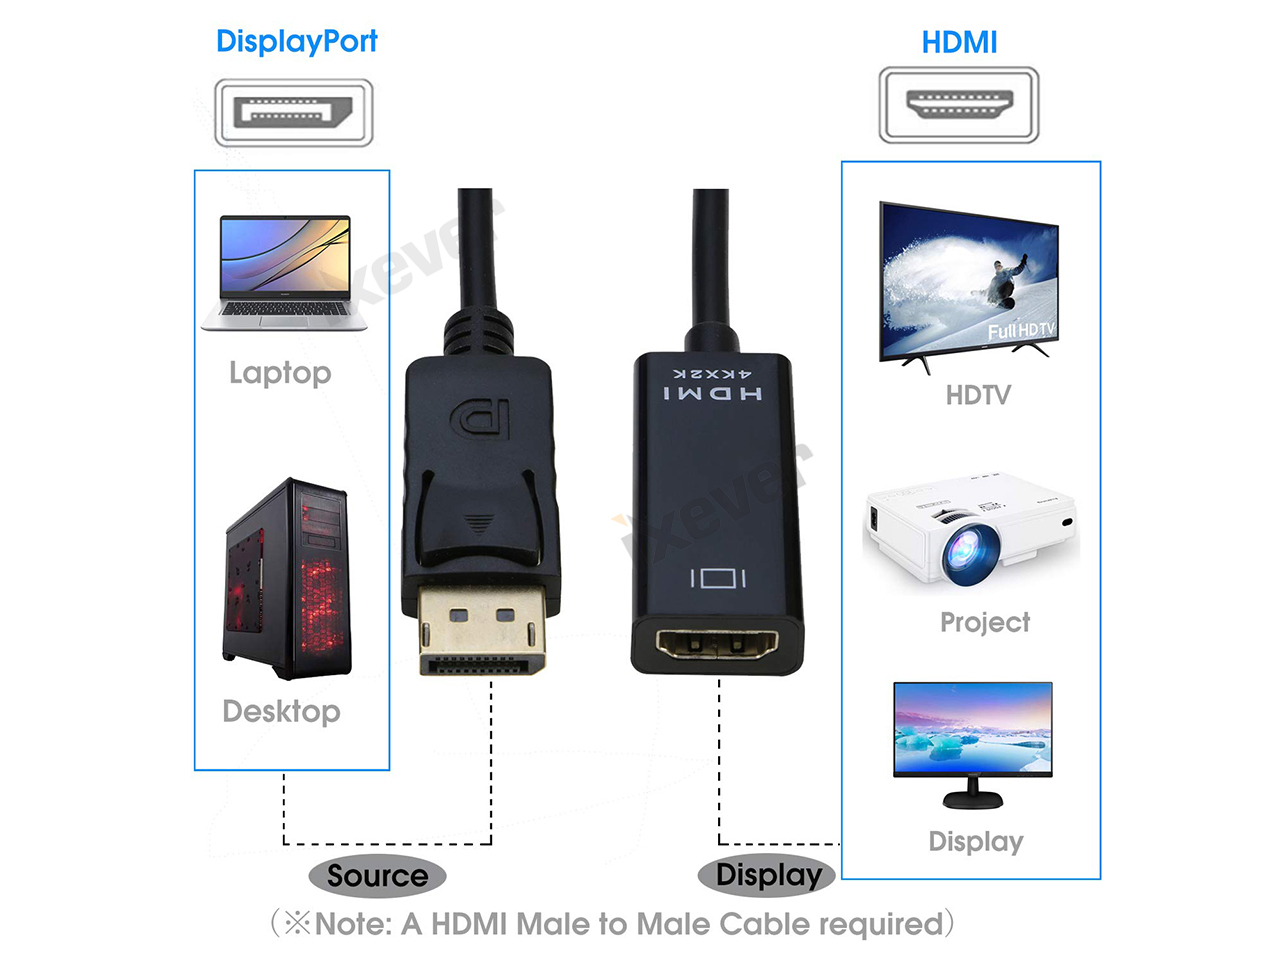 DisplayPort to HDMI Cable 15 feet, Display Port (DP) to HDMI Male to Male  Adapter Cable 1080P HDTV - Gold-Plated